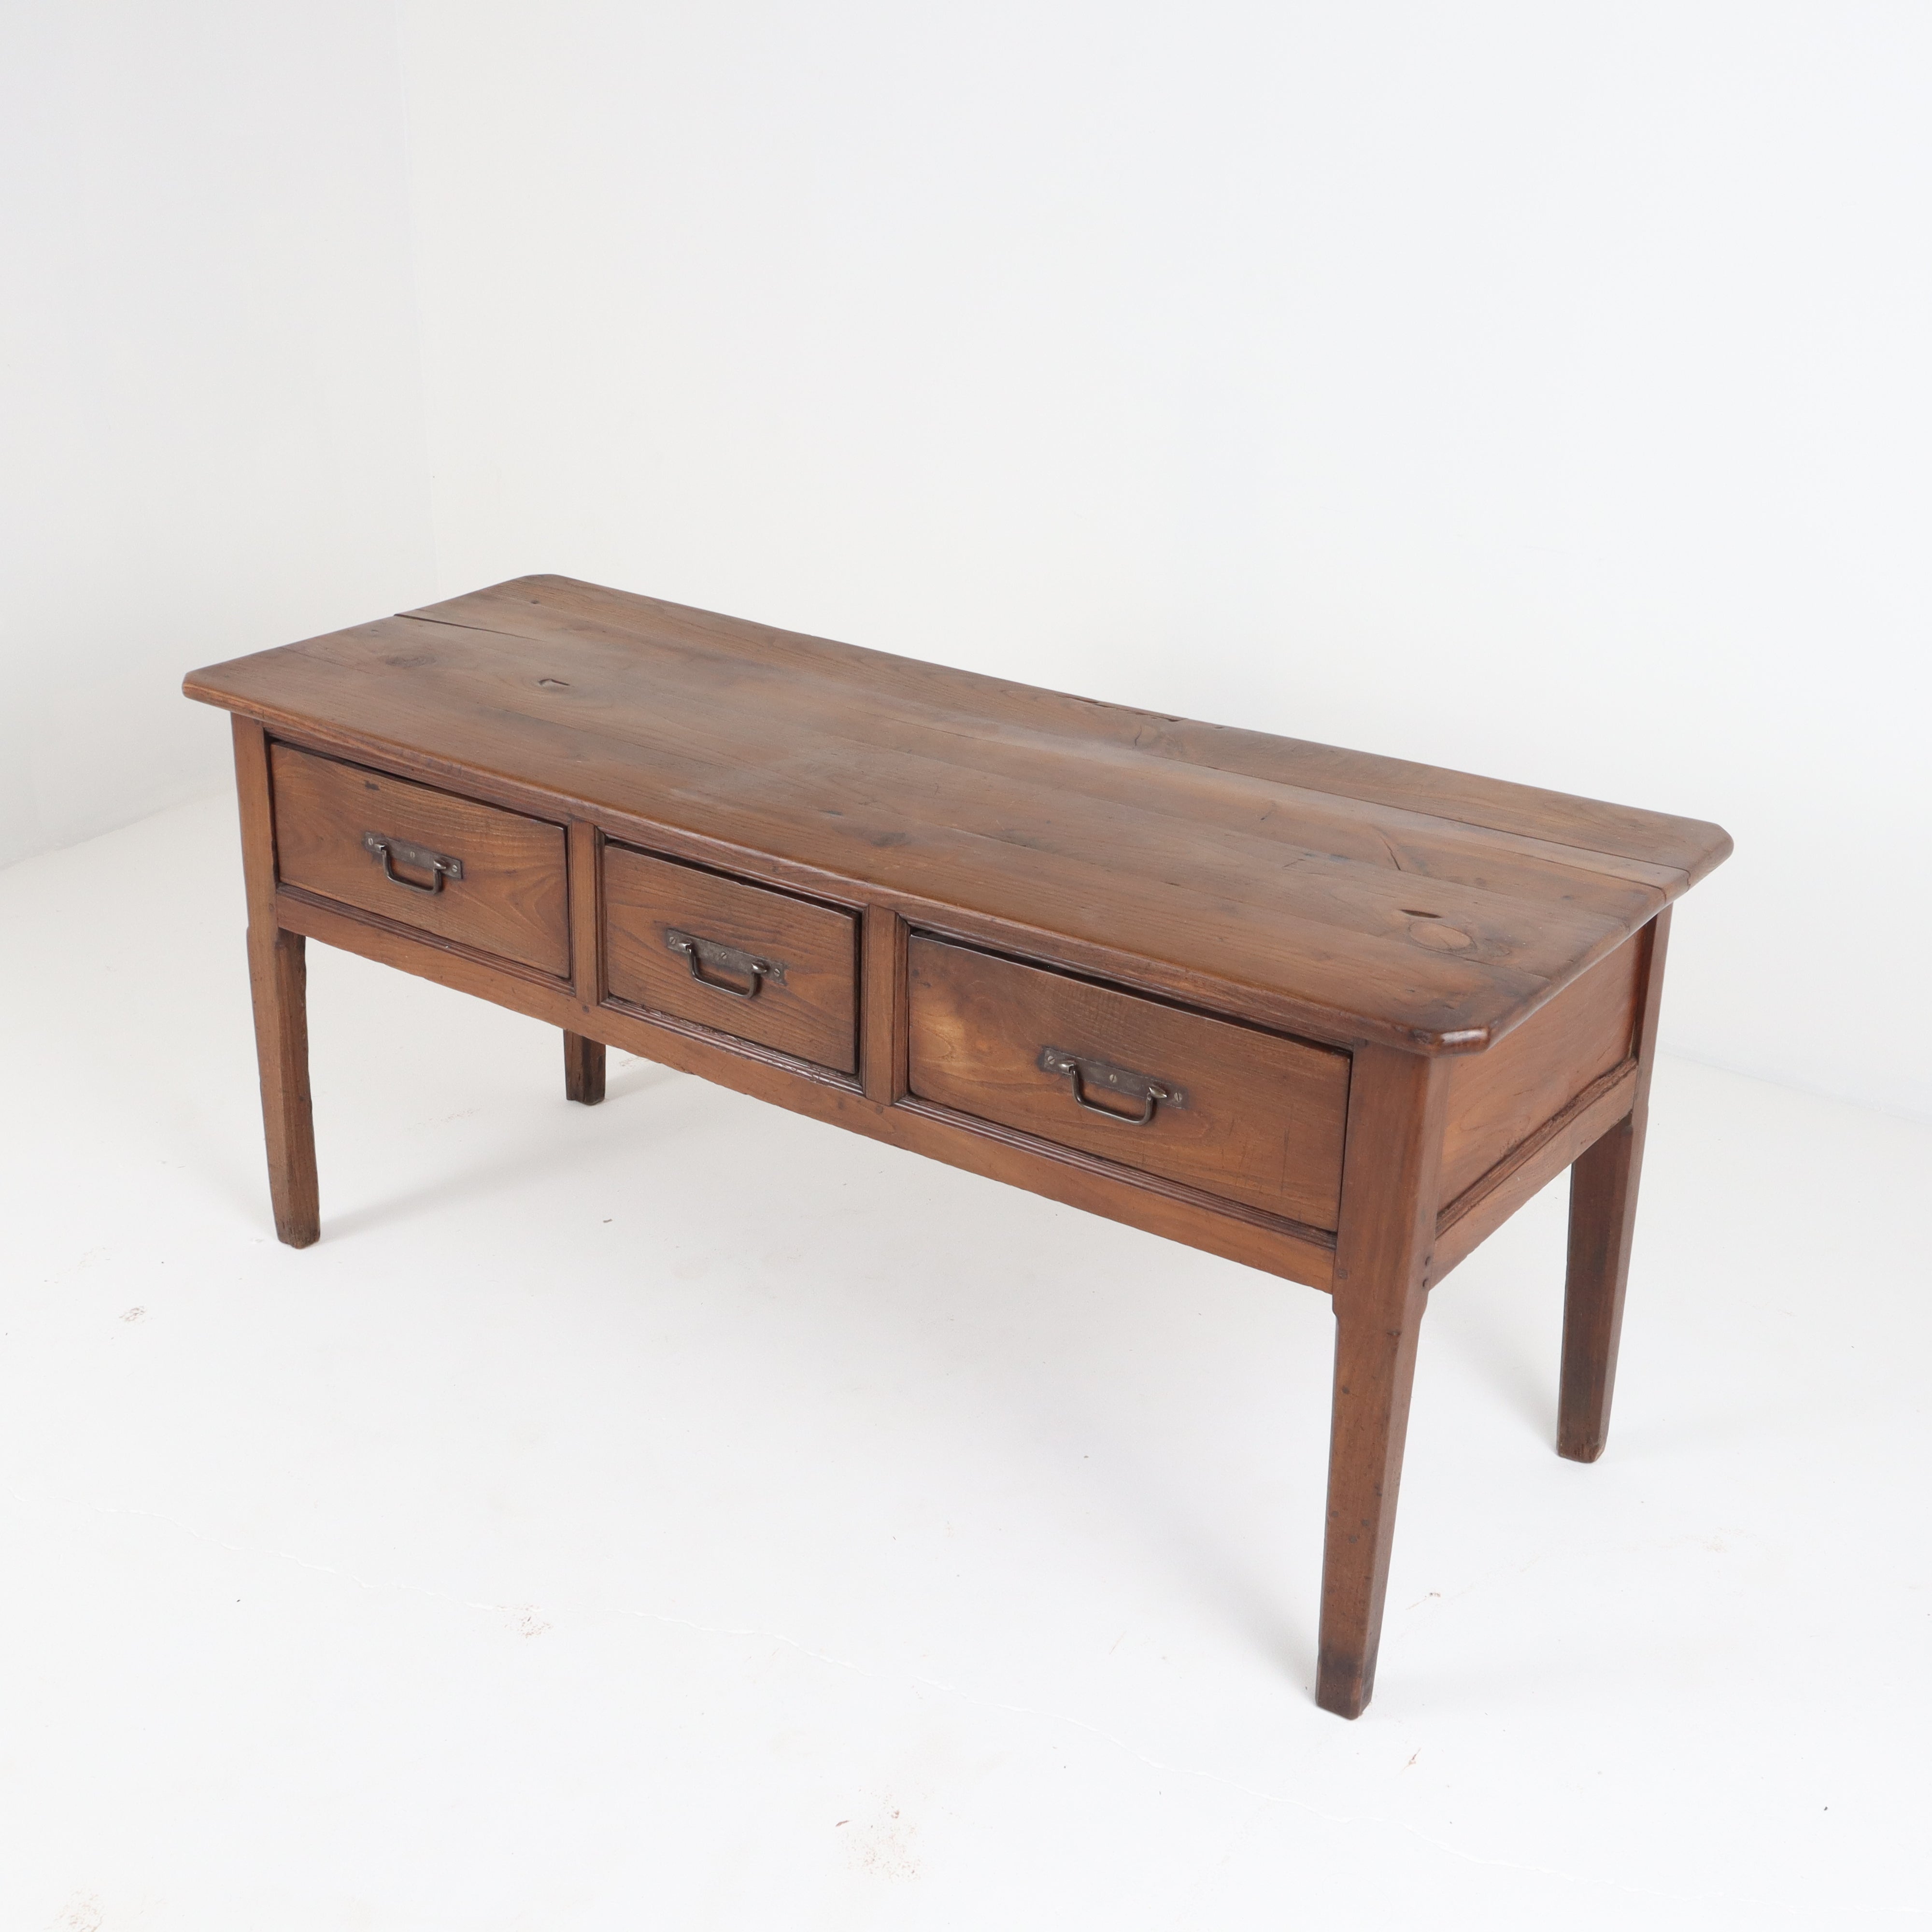 French Antique Fruitwood Server / Sideboard c1860